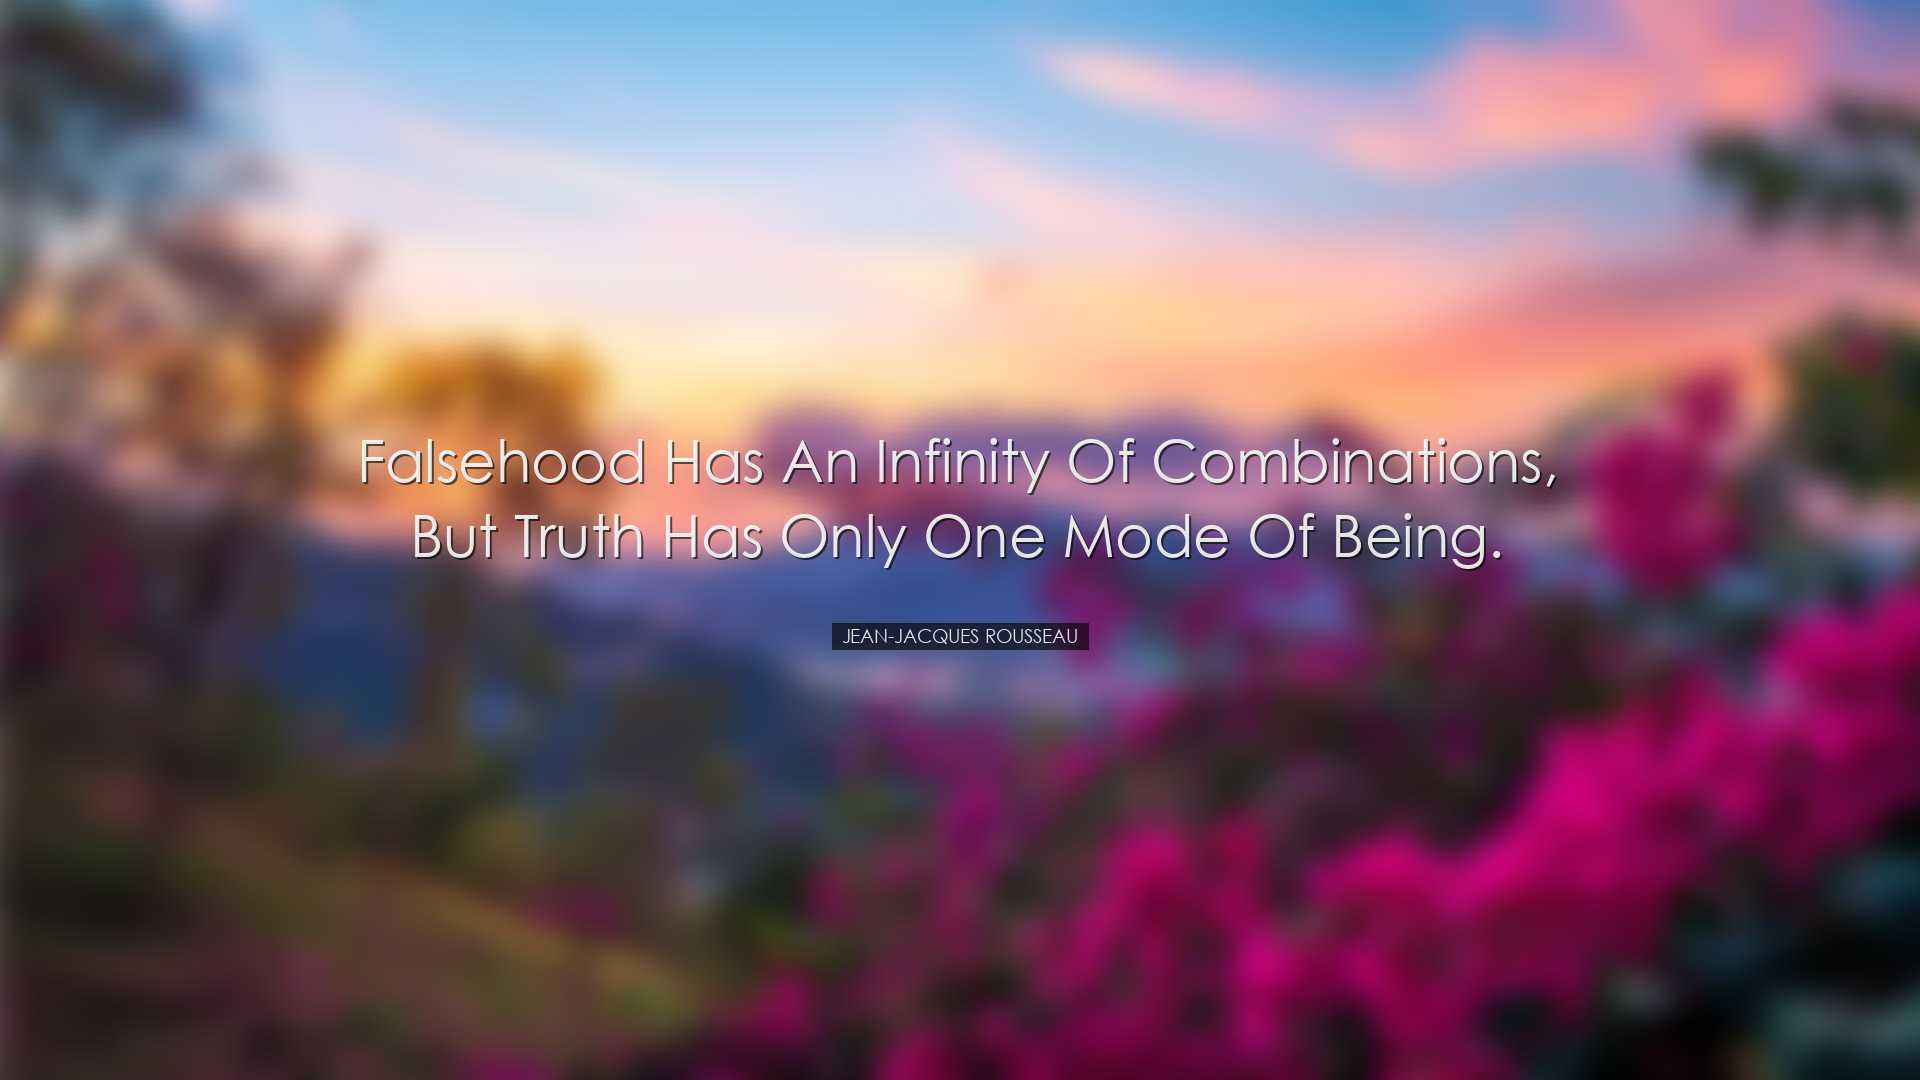 Falsehood has an infinity of combinations, but truth has only one